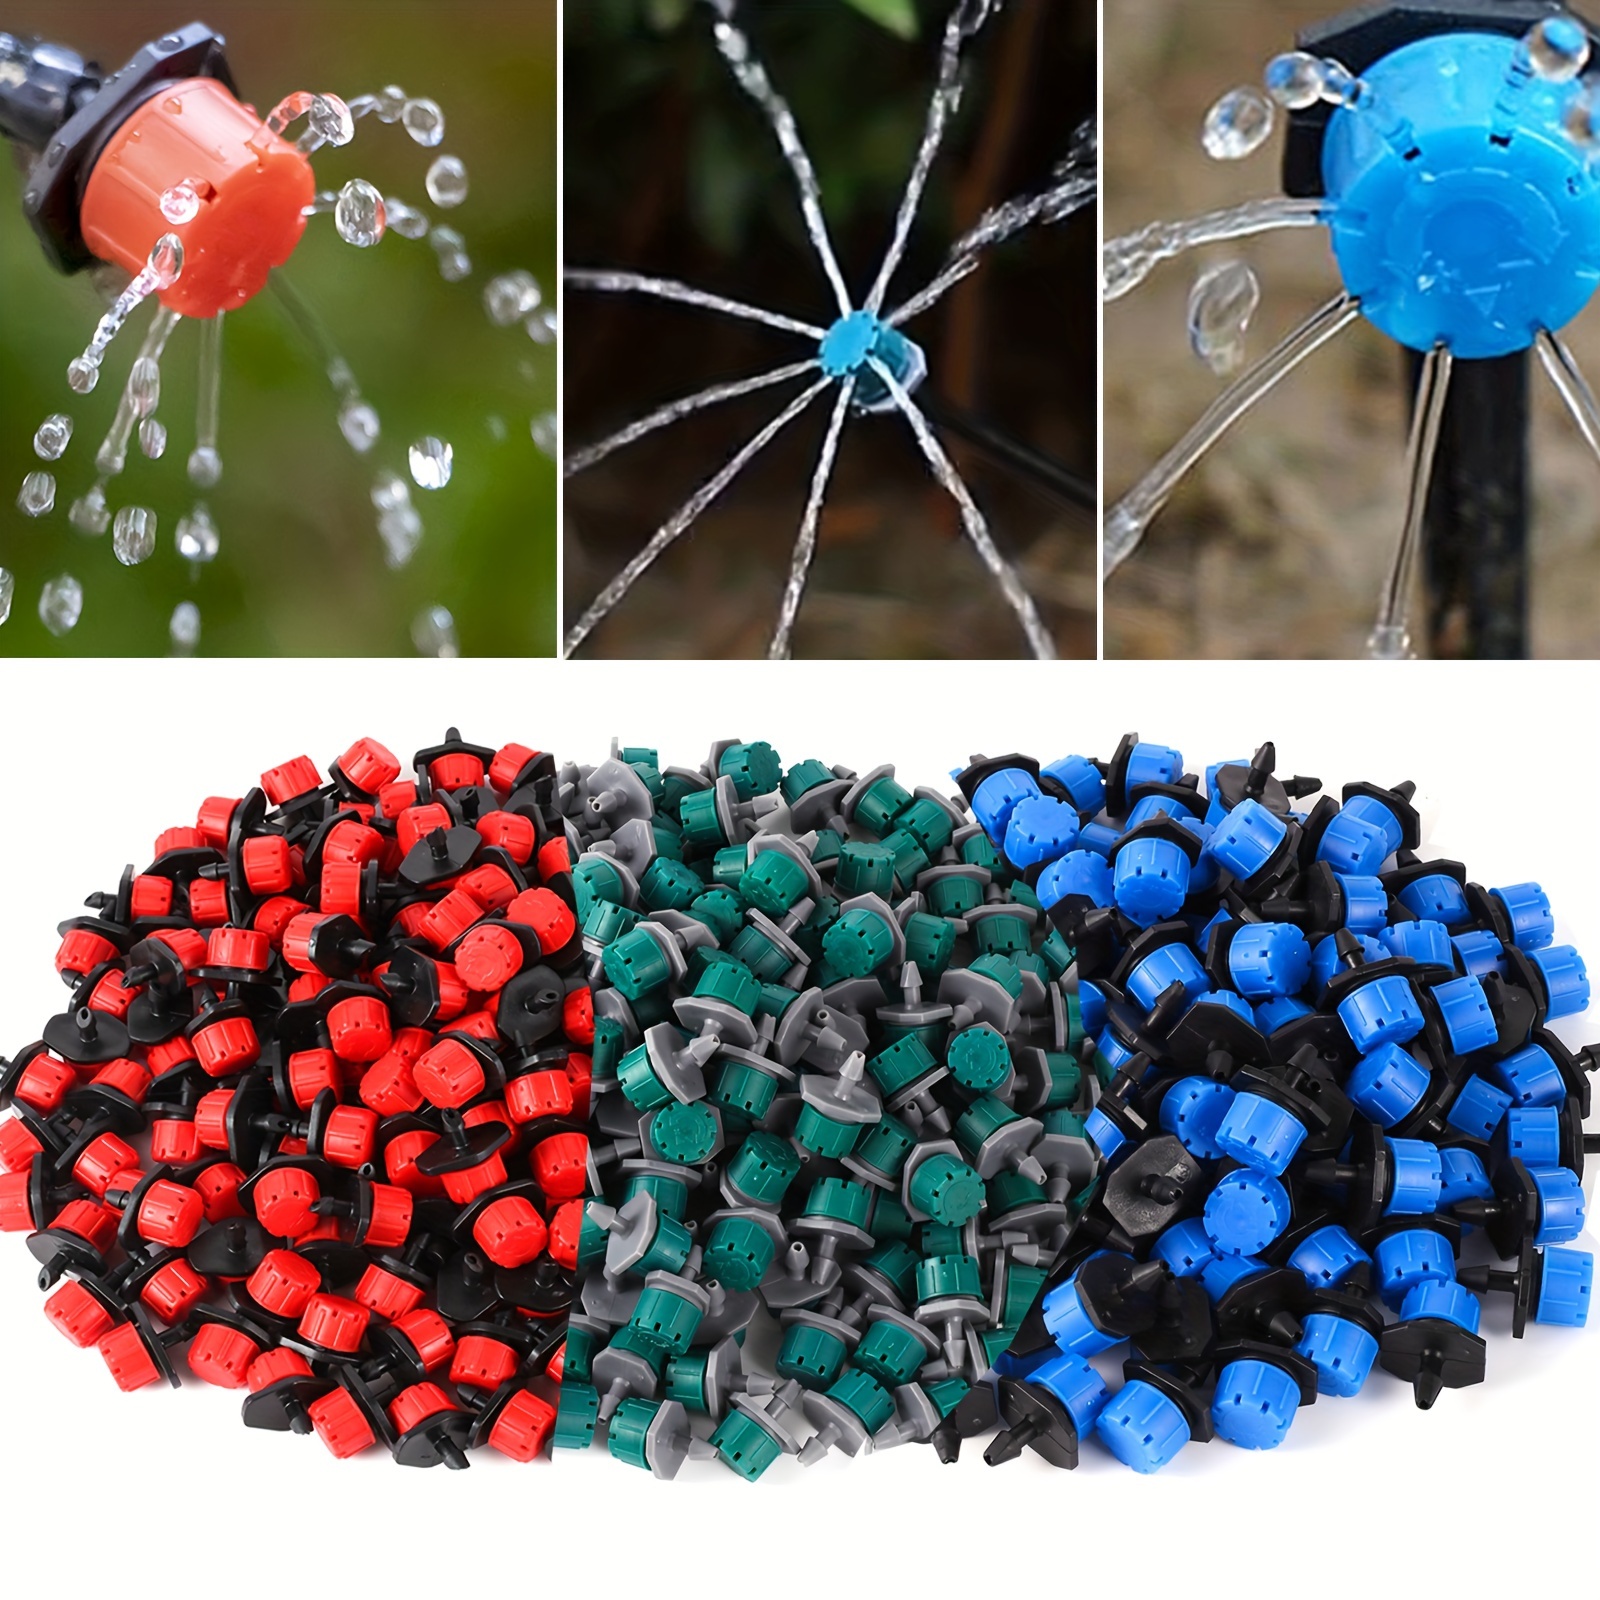 

200pcs Adjustable 8-hole Flow Dripper, 3-color Lawn Drip Irrigation System Waterer, Garden Greenhouse Flower And Vegetable Drip Sprayer, Farm Potted Plant Watering Tool